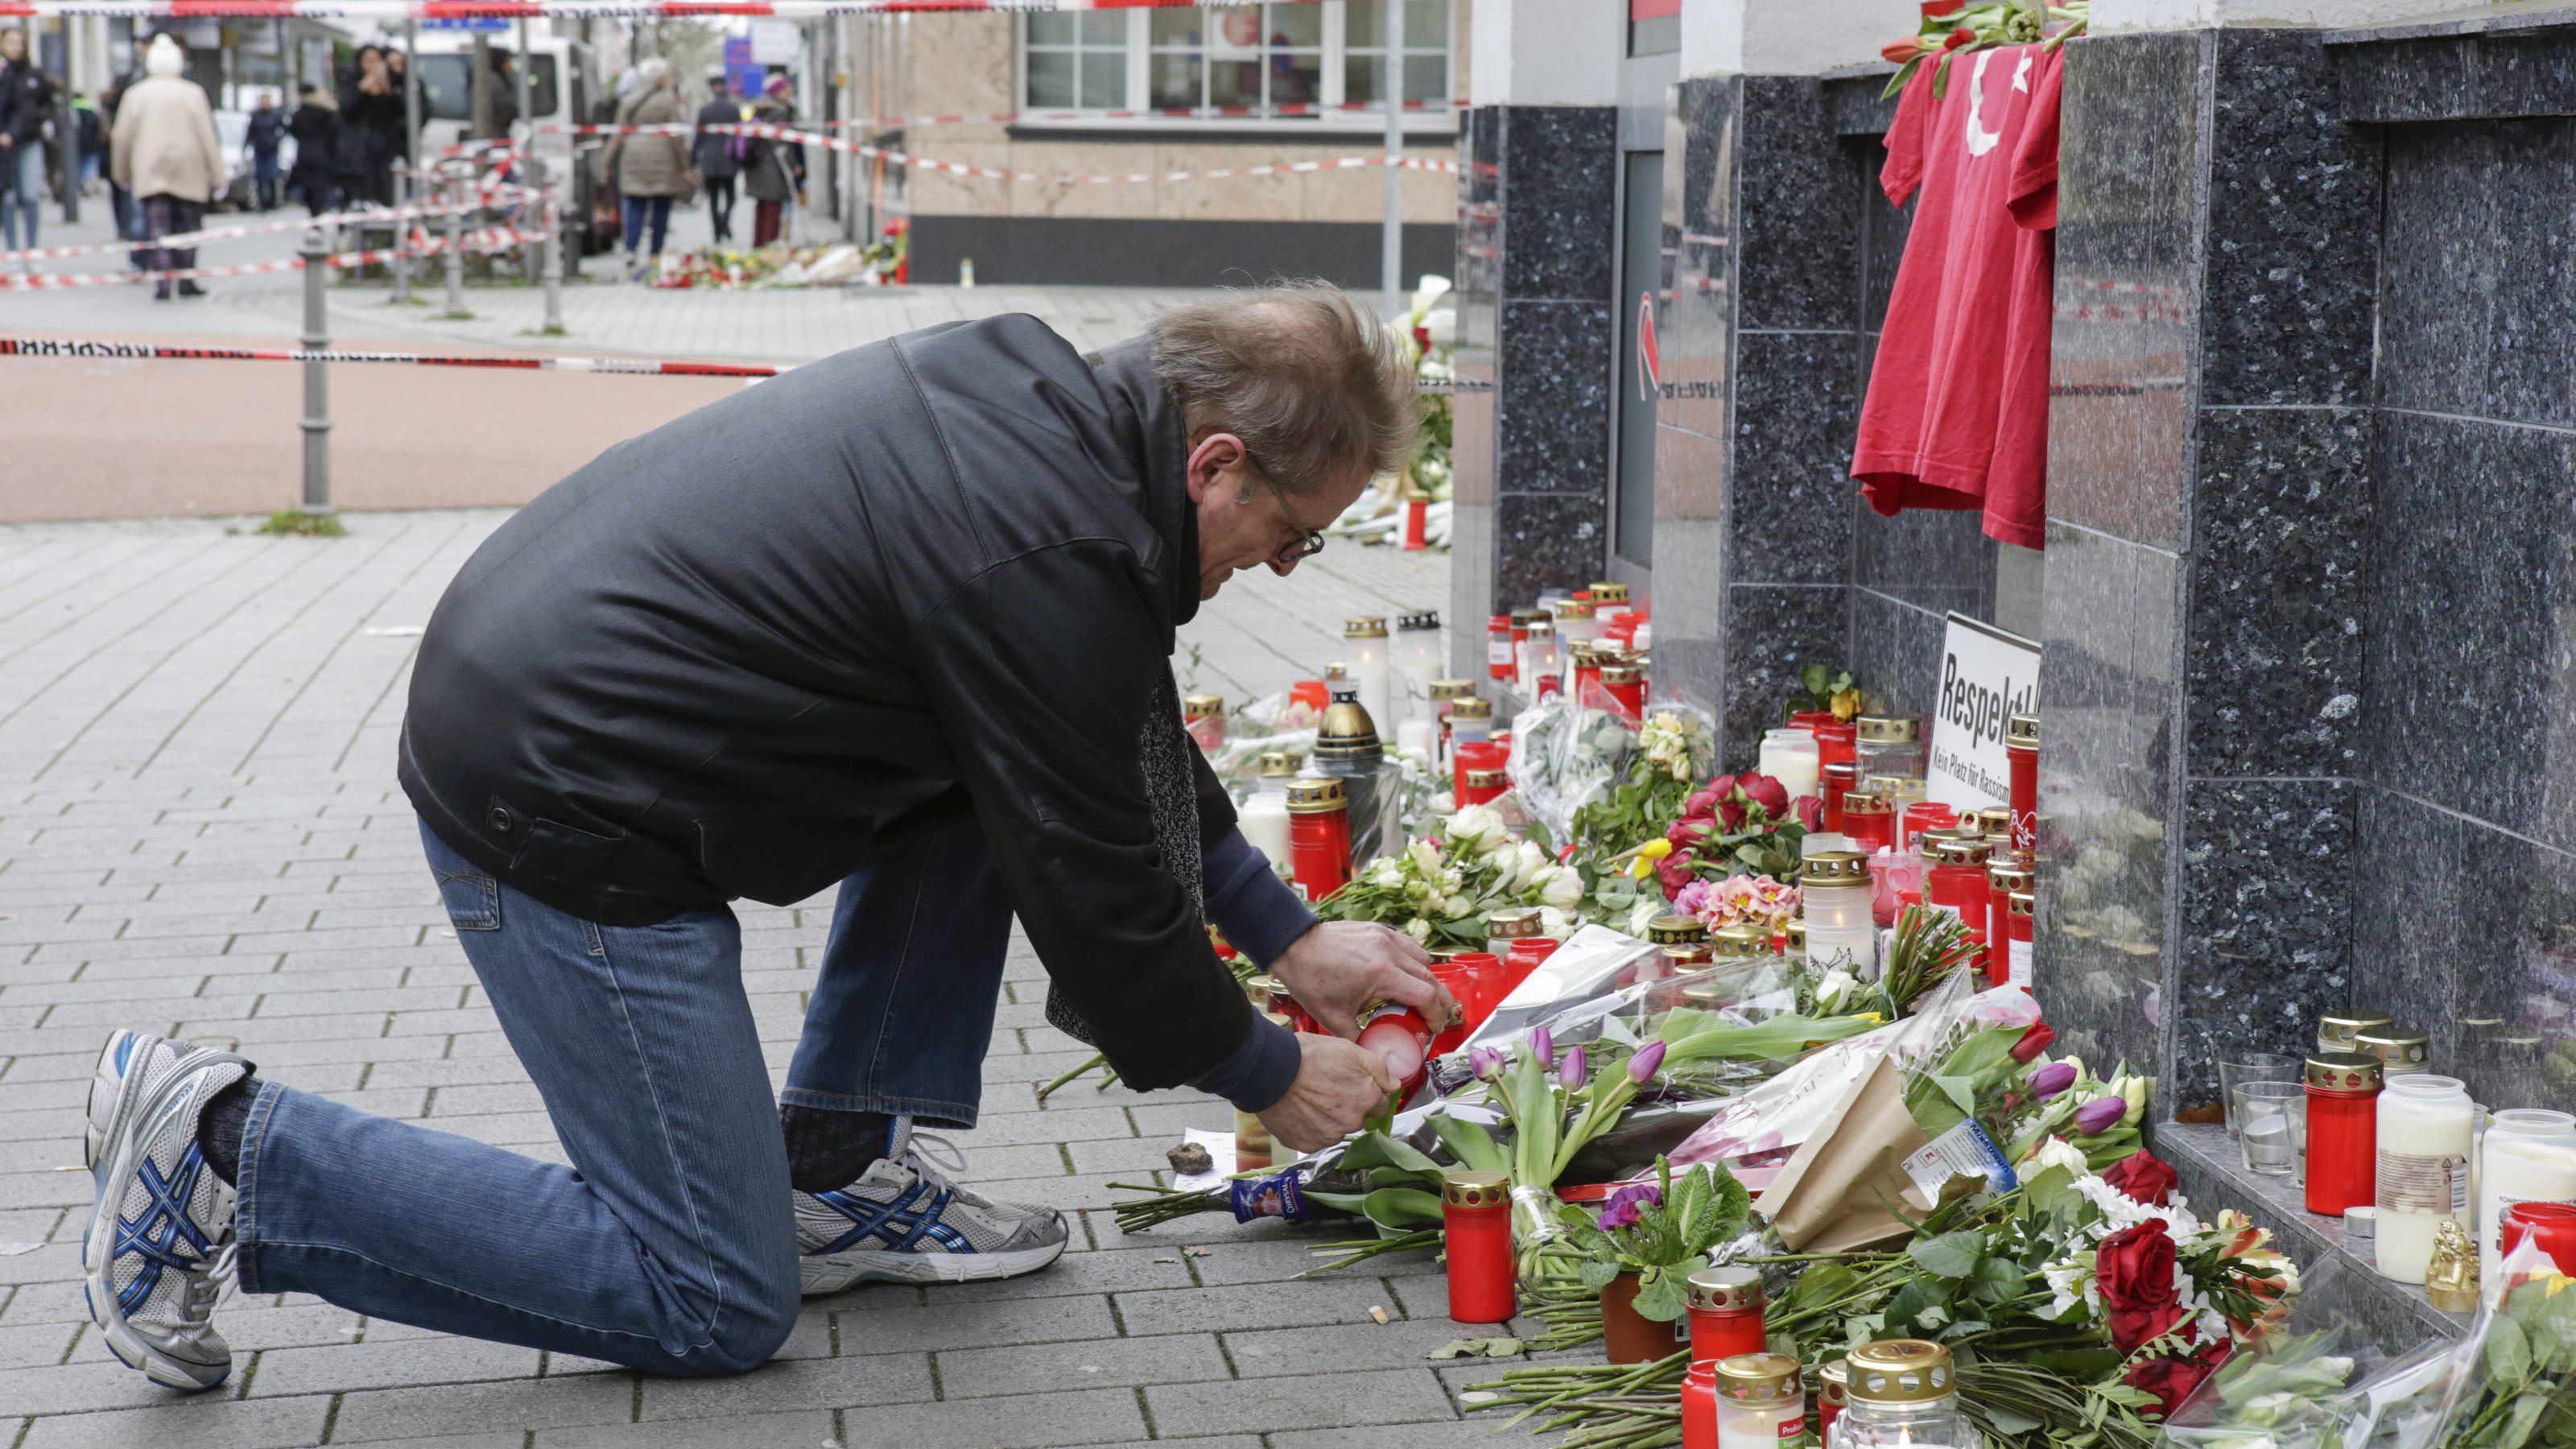 Germany: Anti-fascist protest in Hanau A mourner lays down a candle at one of the memorials for the Hanau shooting. Several thousand people marched through Hanau three days after the Hanau Shootings, to remember the victims and to protest against the